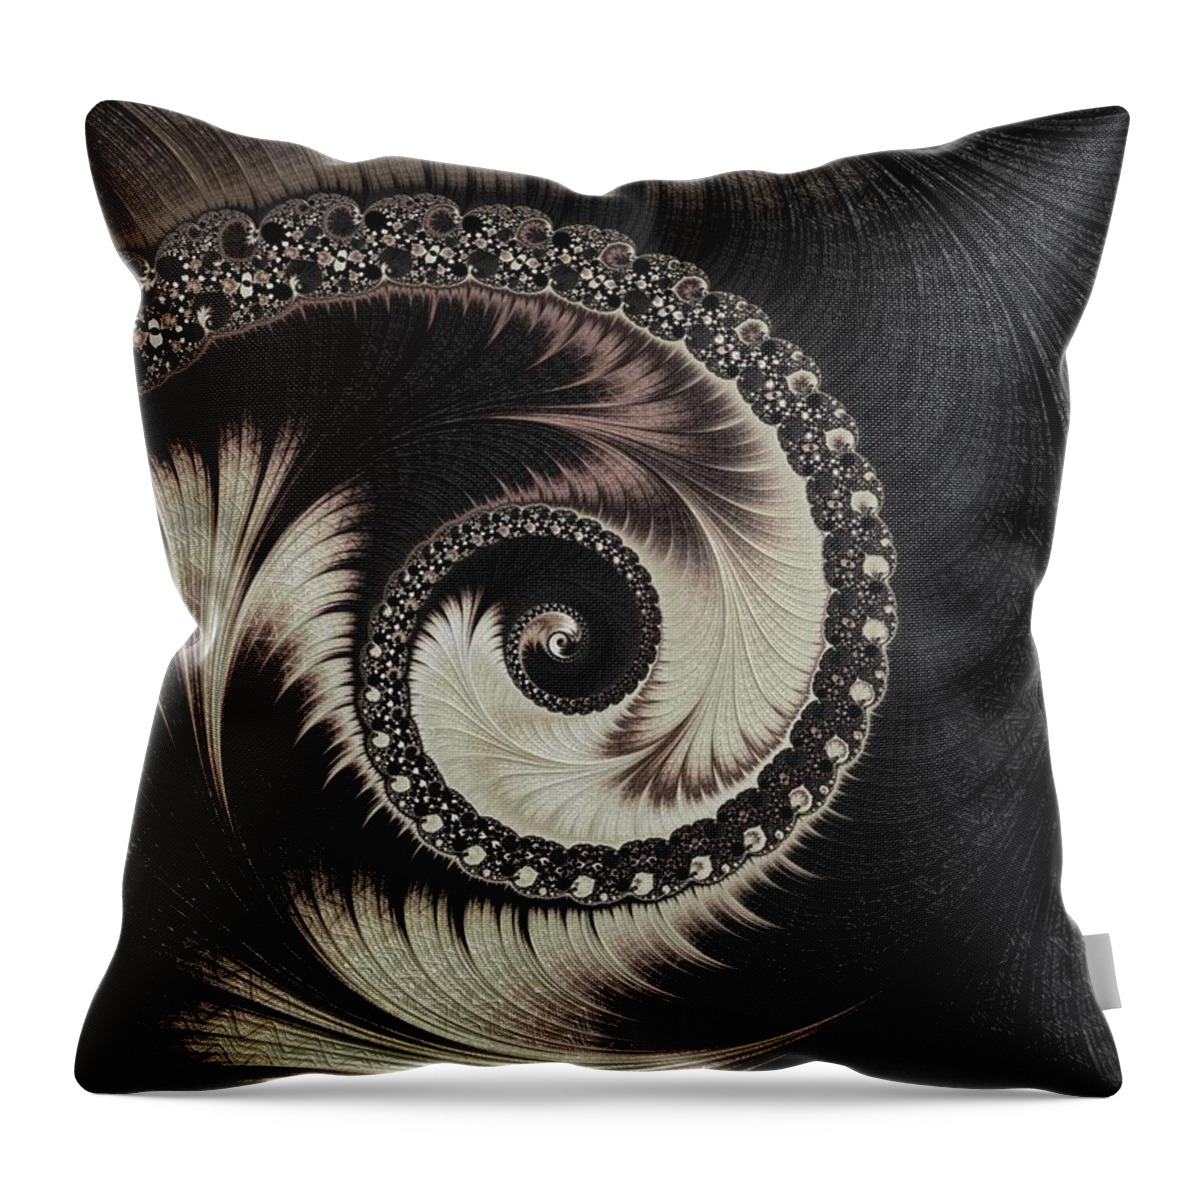 Yin And Yang Throw Pillow featuring the digital art Yin and Yang by Mary Ann Benoit